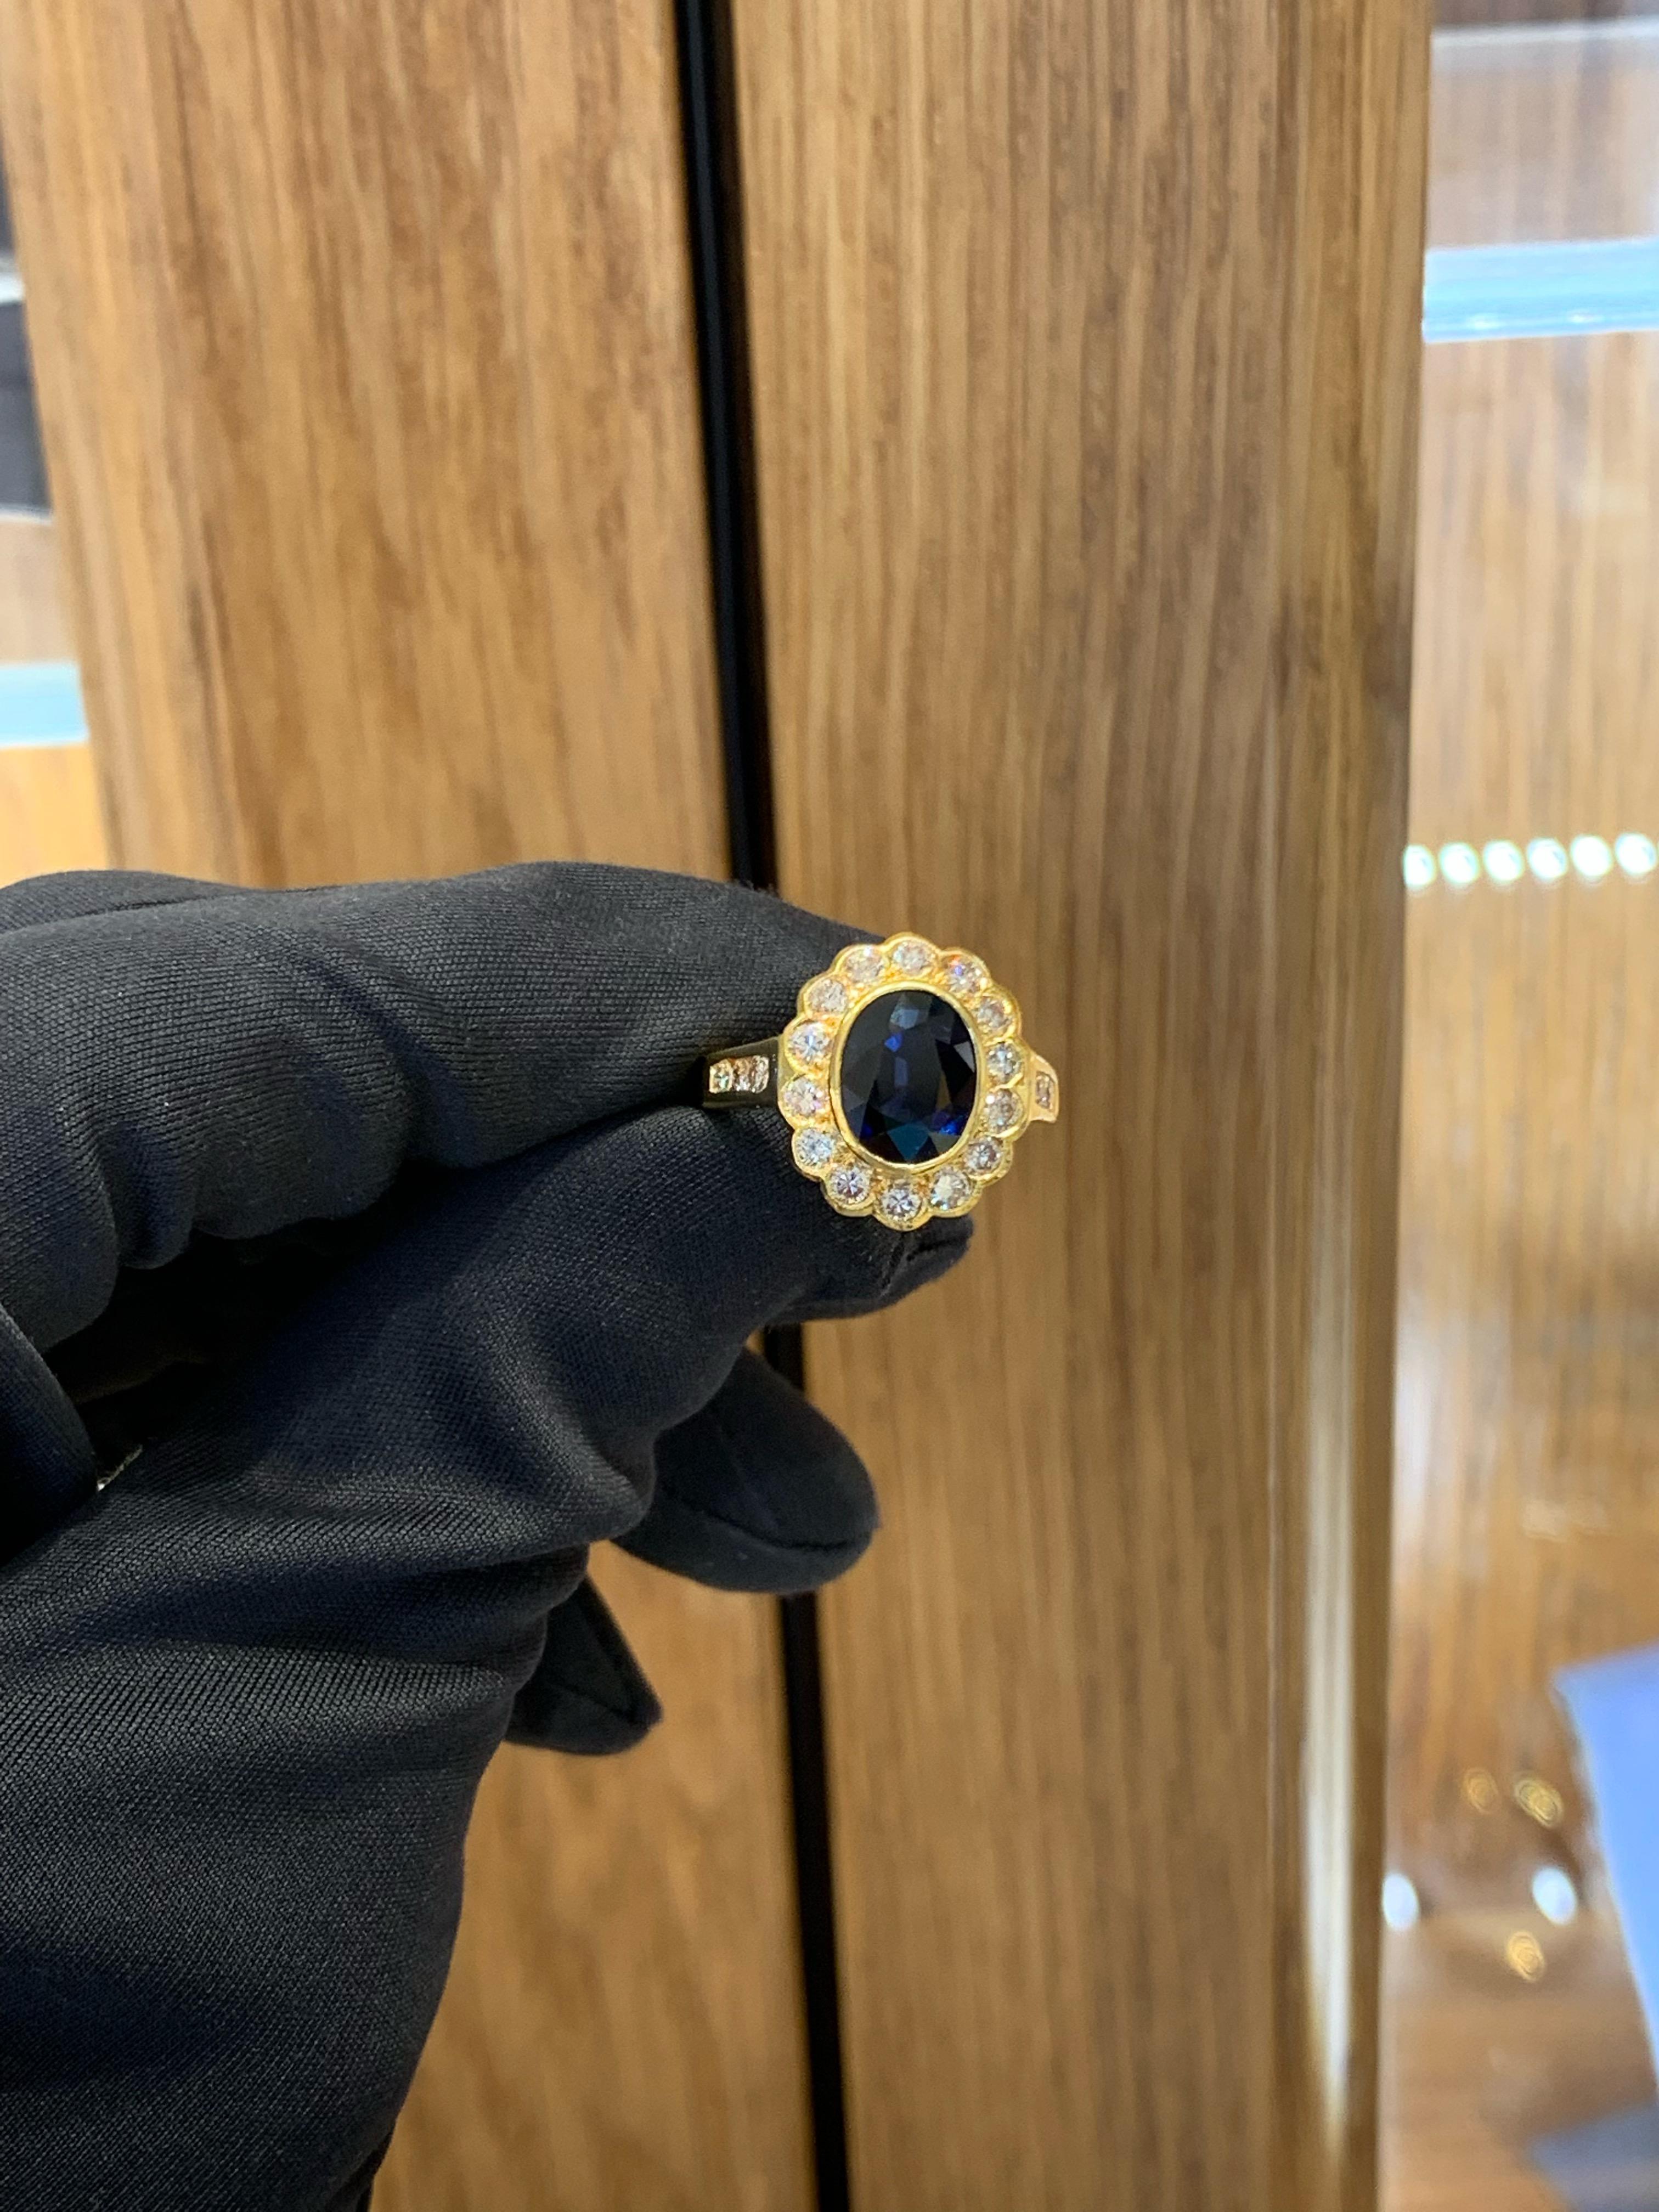 Beautiful Oval Cut Blue Sapphire & Diamond Flower Ring Set In 18k Yellow Gold.
Amazing Shine, Incredible Craftsmanship.
Great Statement Piece.
Very Well Crafted.
Approximately 3.0 Carats Blue Sapphire.
Approximately 1.0 Carats Of Diamonds.
Nice &